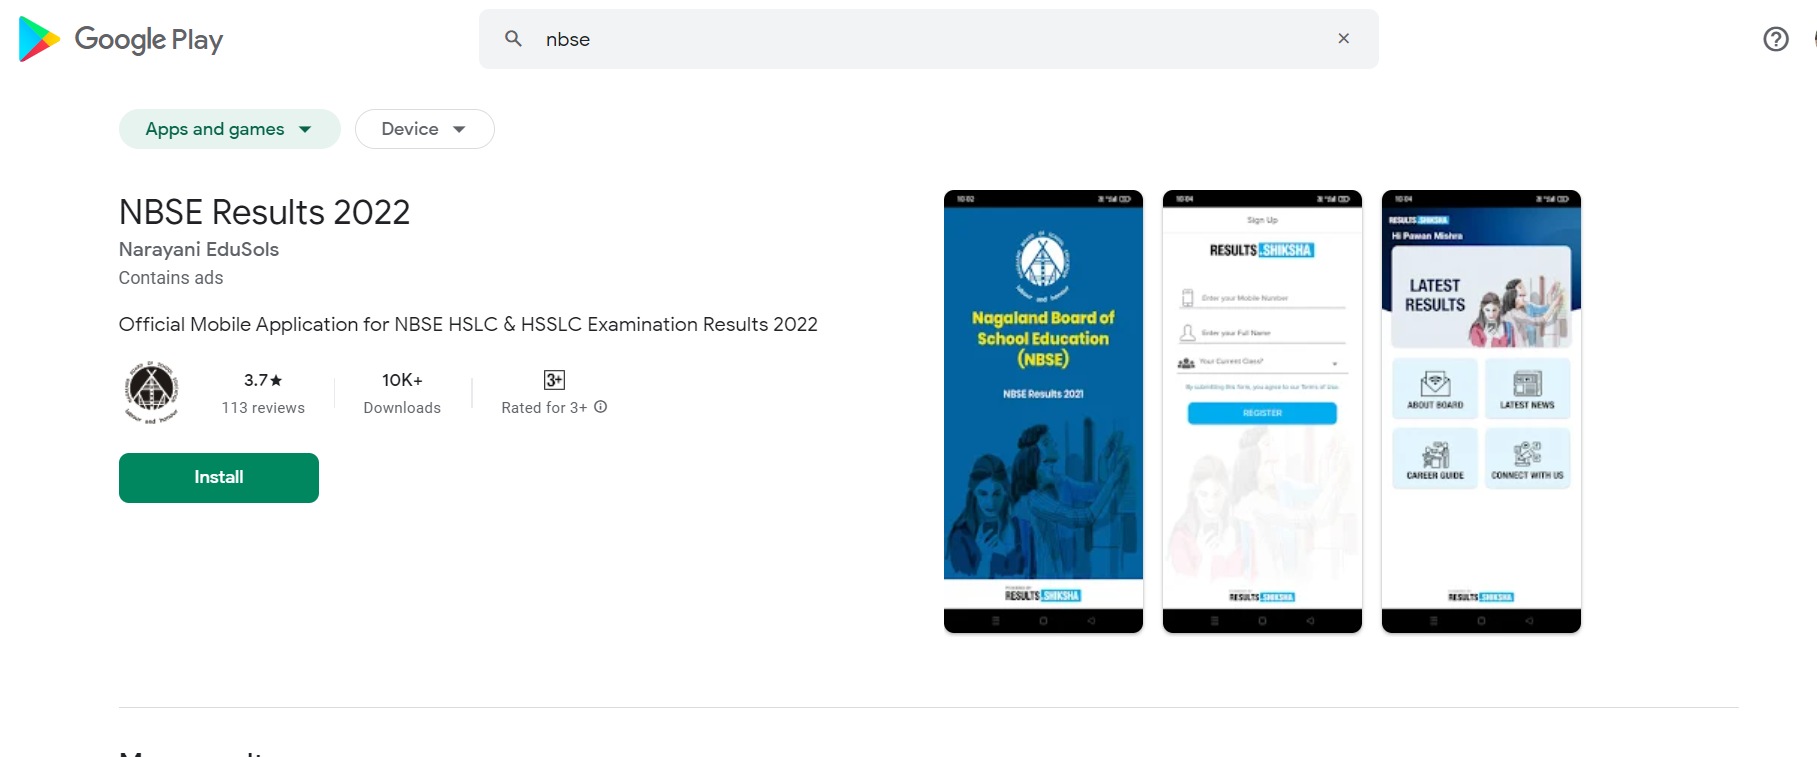 NBSE result will be available on The mobile Application